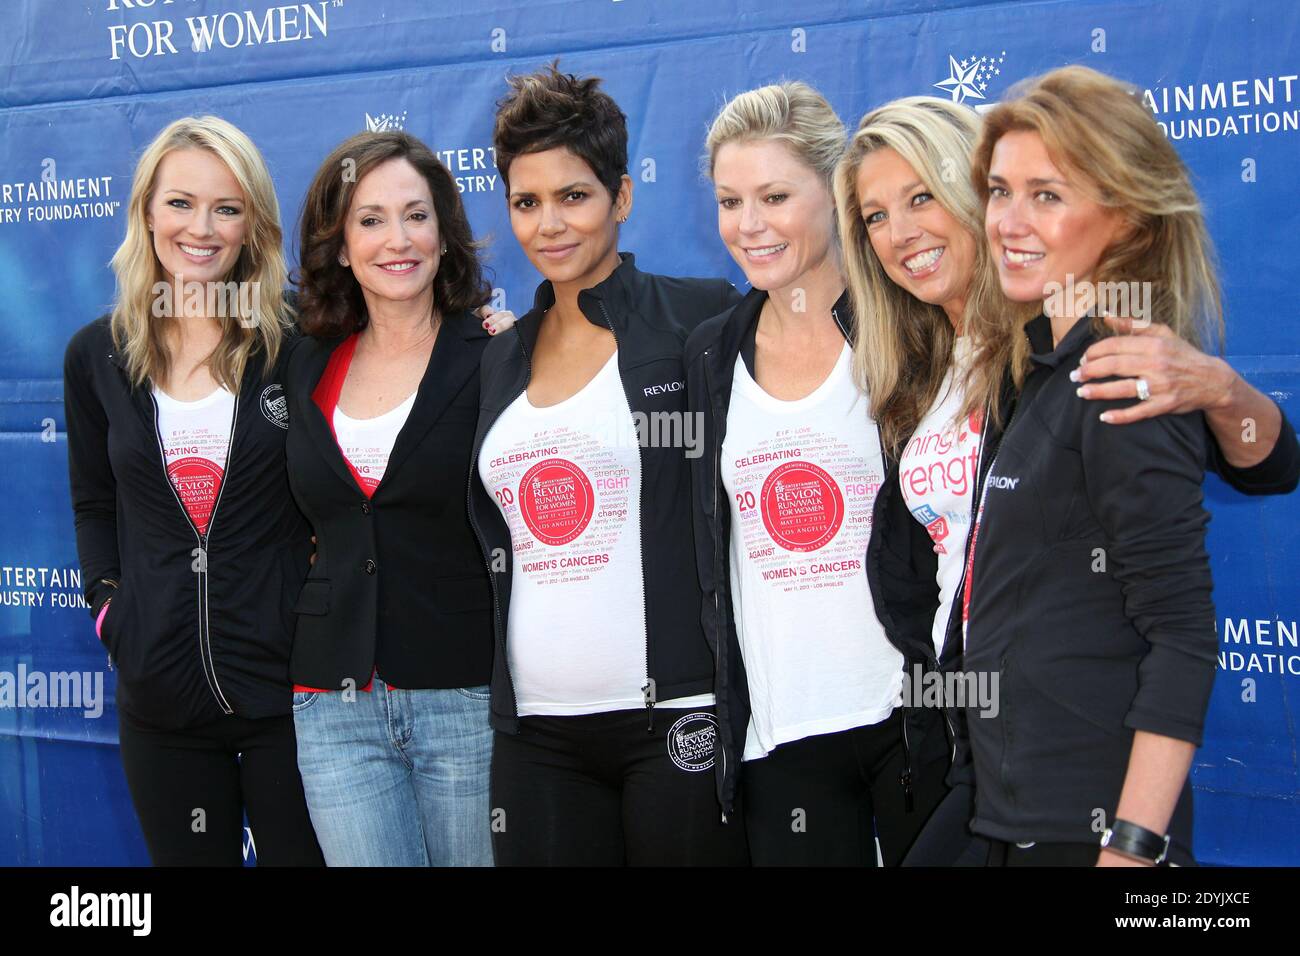 (L-R) Host Brooke Anderson, Lilly Tartikoff, Revlon Brand Ambassador Halle Berry, host Julie Bowen, fitness instructor Denise Austin and Global Chief Marketing Officer arrive at the '20th Annual EIF Revlon Run/Walk For Women' held at the Los Angeles Memorial Coliseum in Los Angeles, CA, USA, on May 11, 2013. Photo by Krista Kennell/ABACAPRESS.COM Stock Photo